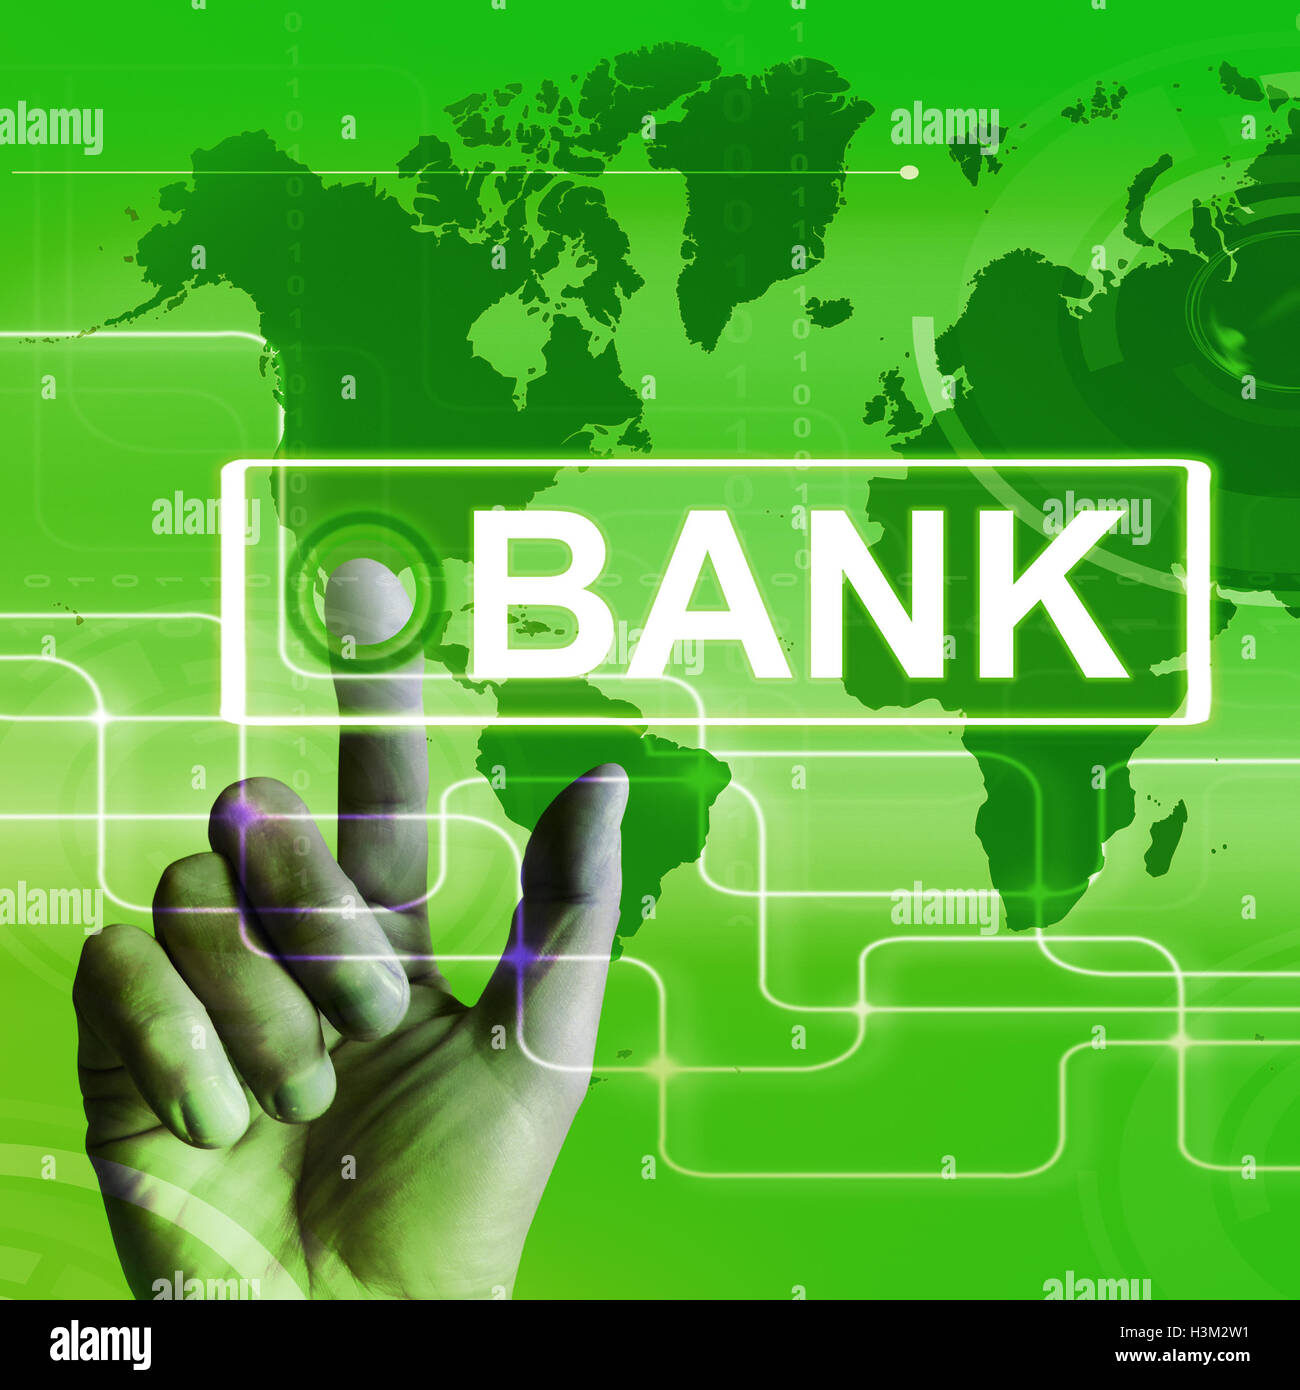 Bank Map Displays Online and Internet Banking Stock Photo